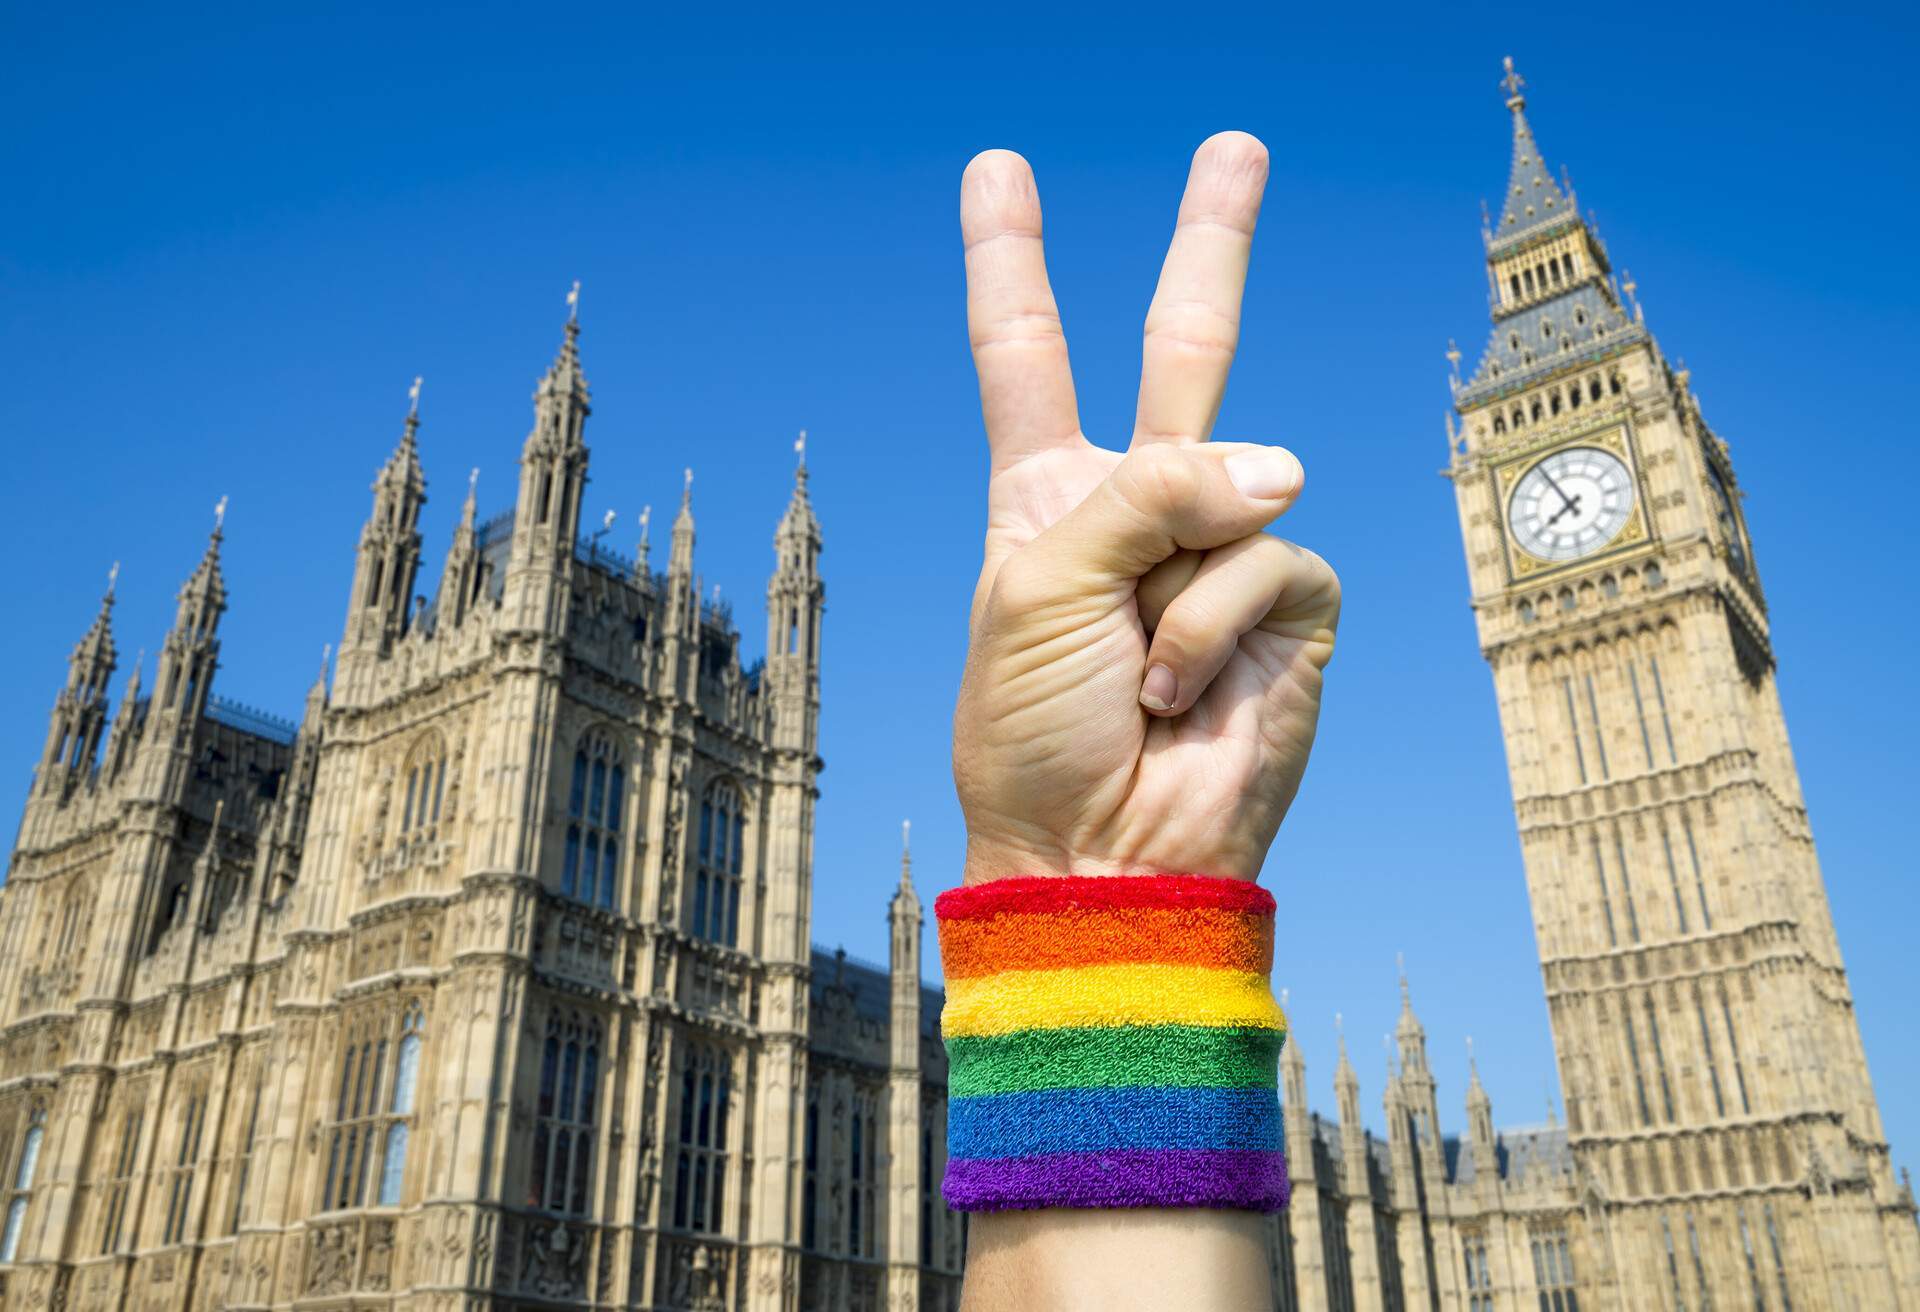 Hand wearing gay pride rainbow flag wristband holding up a victory/peace sign gesture in front of the Houses of Parliament at Westminster, London, UK